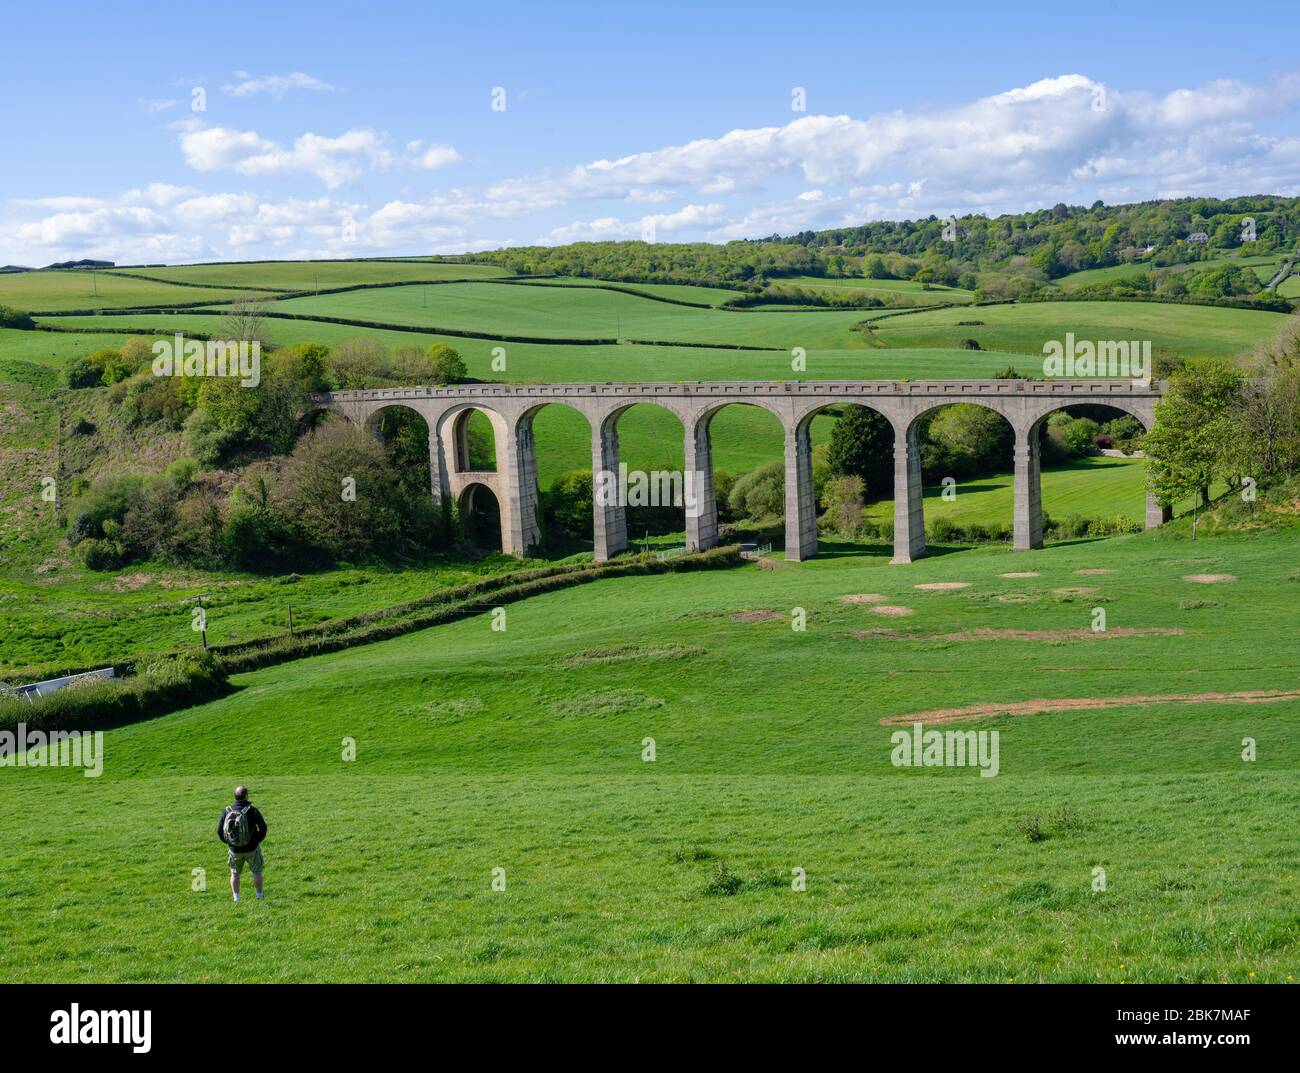 Cannington, East Devon. 2nd May 2020. UK Weather: The imposing viaduct at Cannington frames the beautiful East Devon countryside on a beautiful sunny afternoon during the coronavirus pandemic lockdown. A lone walker admires the view. Credit: Celia McMahon/Alamy Live News Stock Photo